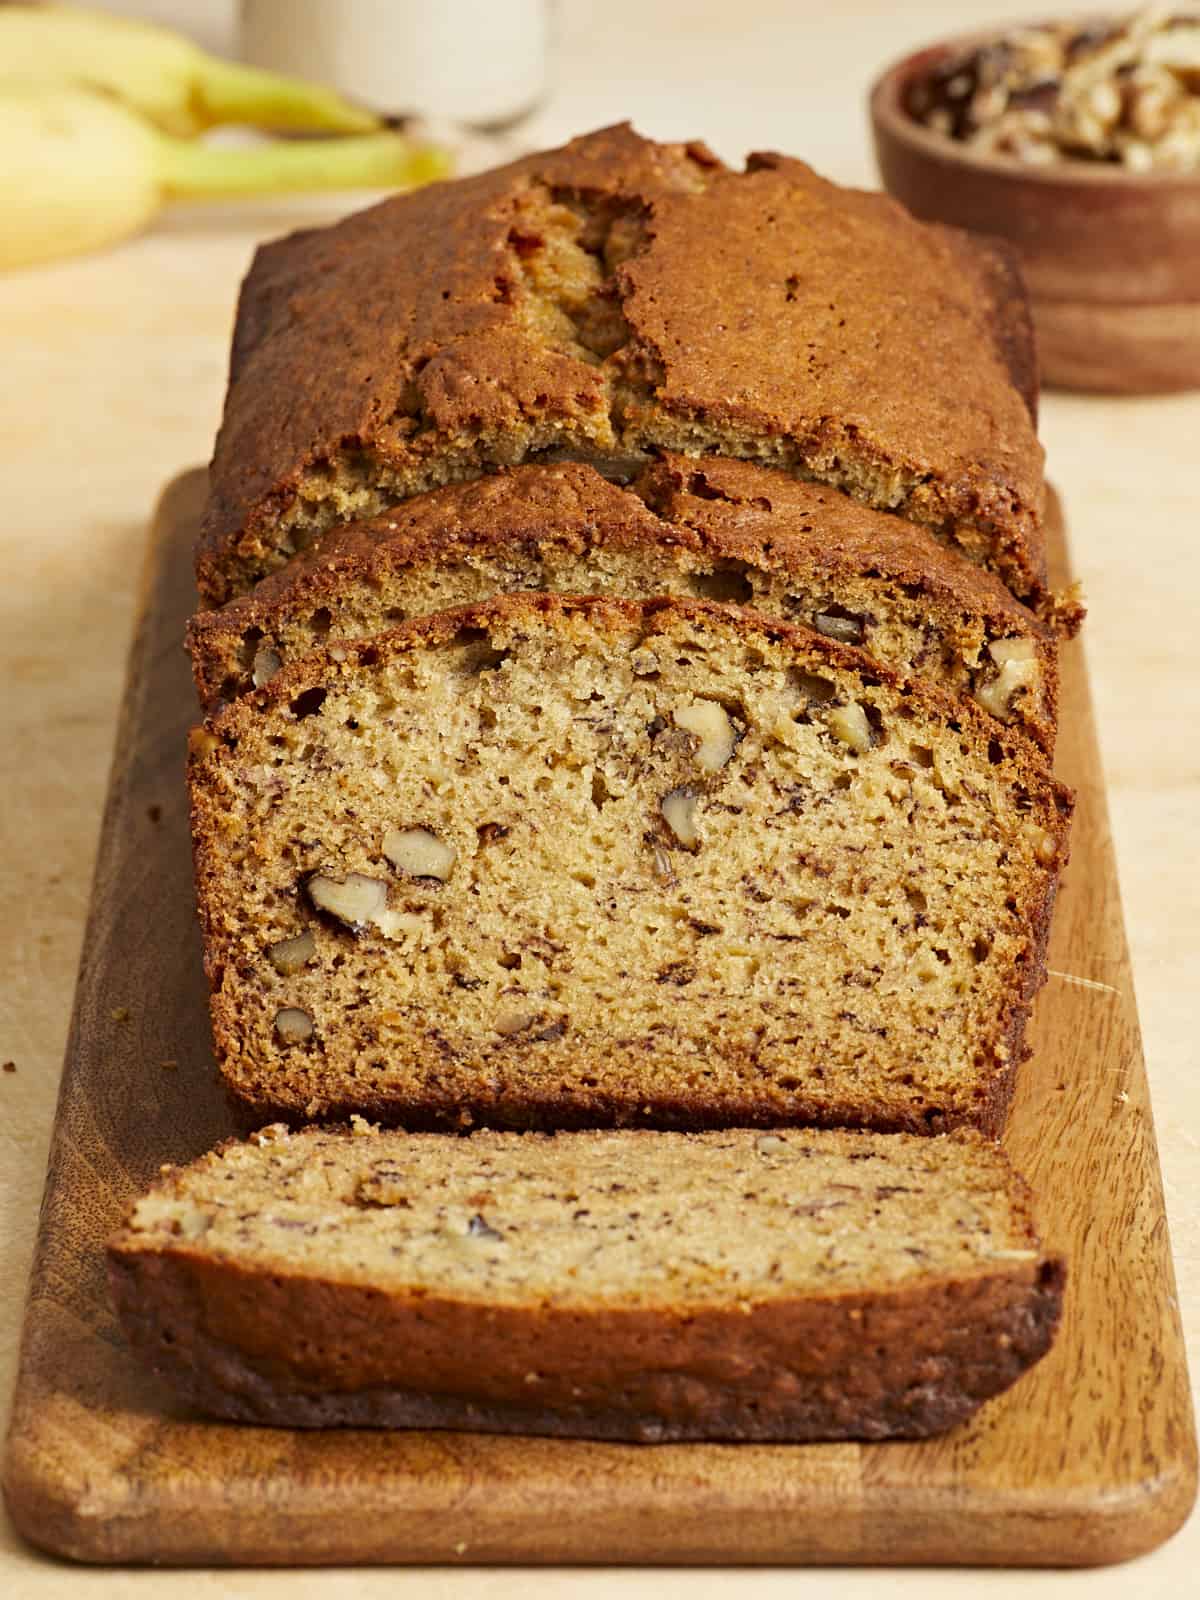 This Super Moist Banana Bread Is a Must-Try for Banana Bread Lovers!